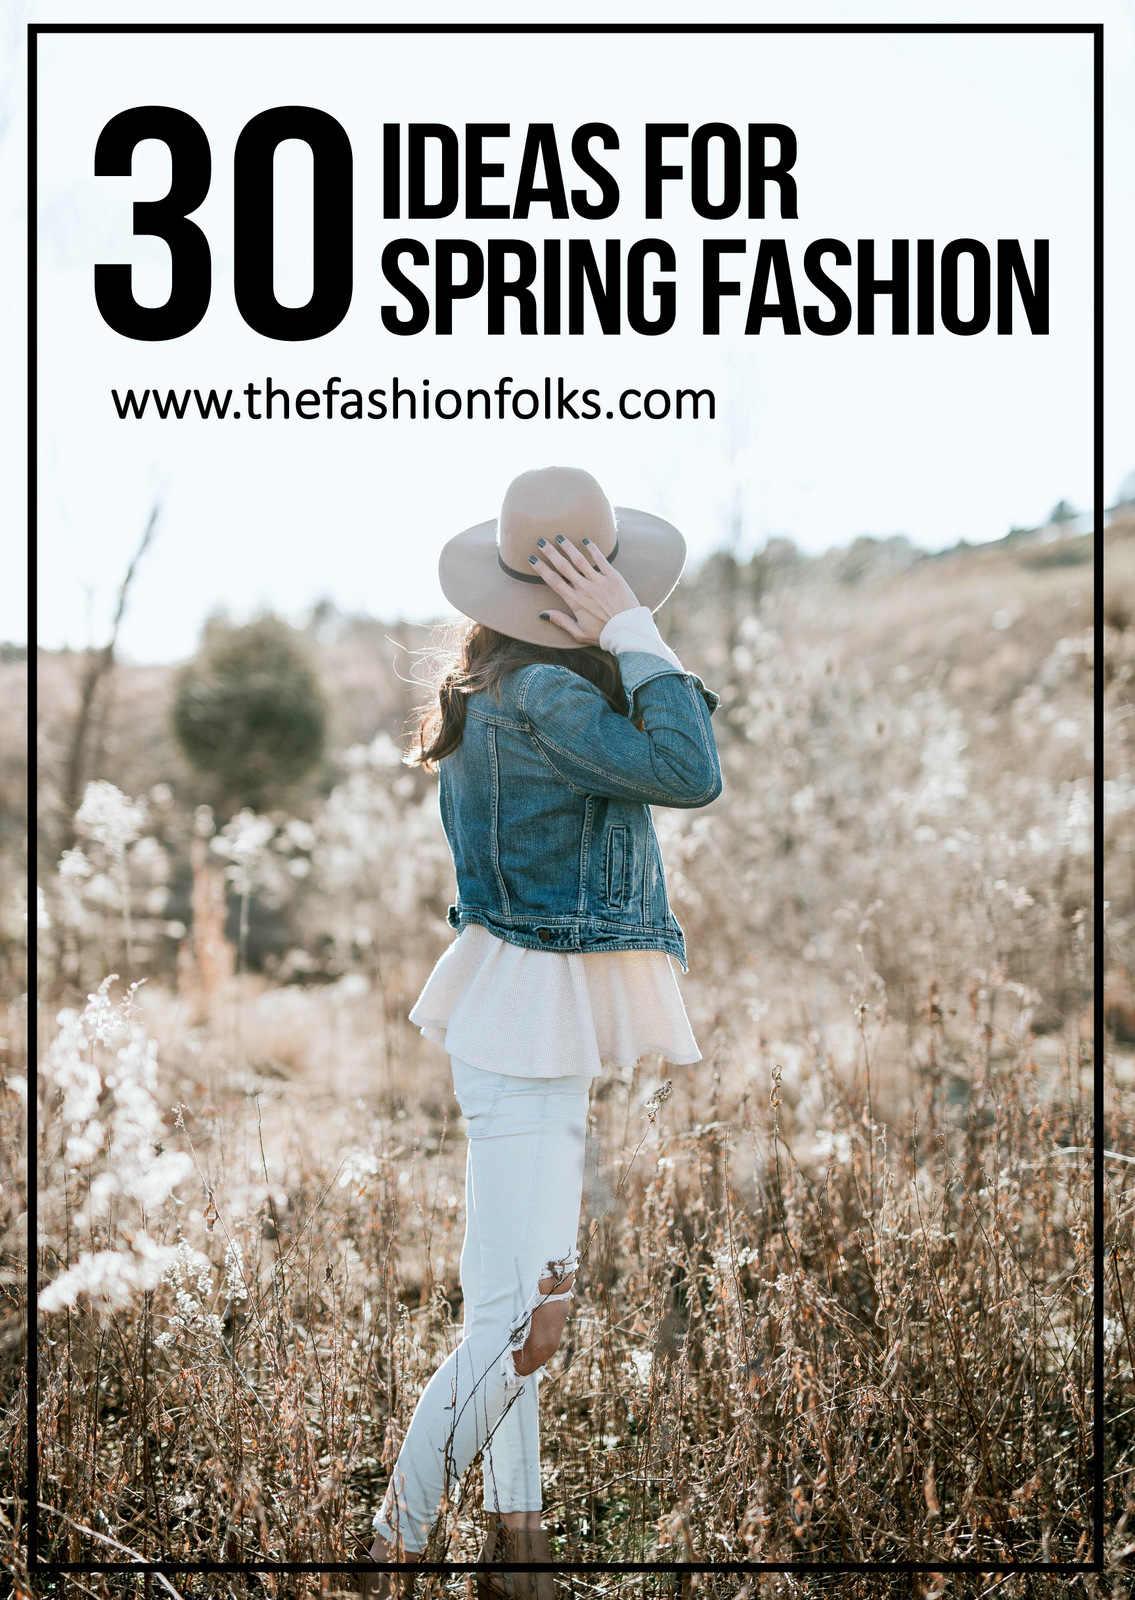 30 Ideas For Spring Fashion 2017 + Outfit inspiration, street style, styling tips, spring clothes | The Fashion Folks